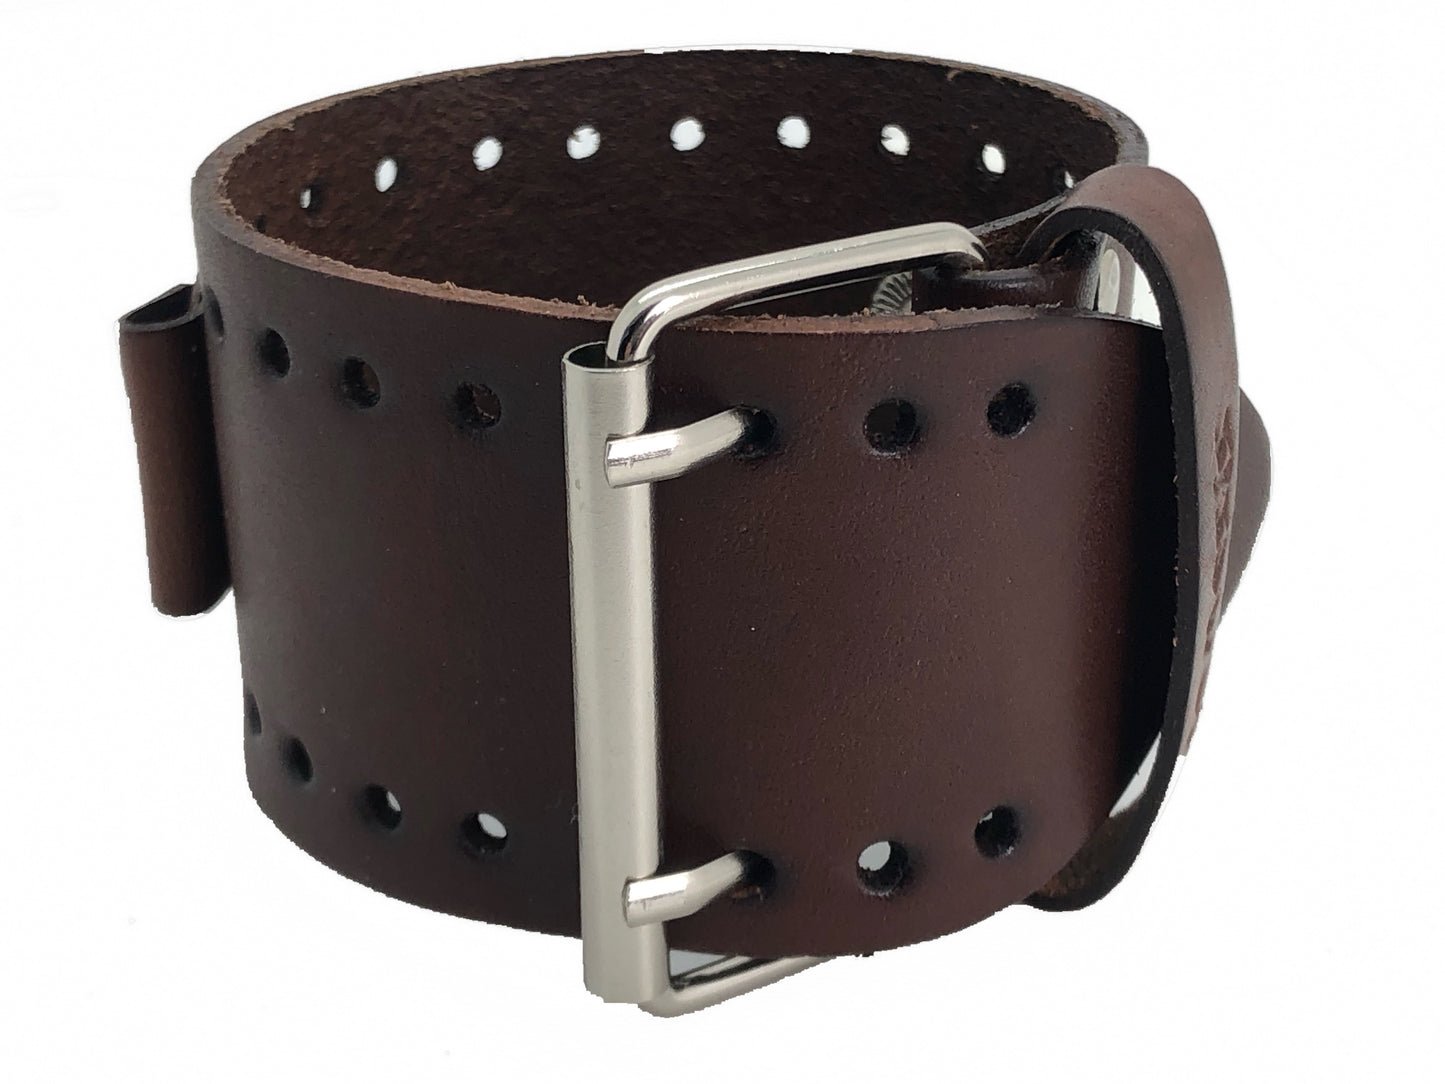 Moonwalker Luminous Green Diver with Perforated Brown Leather Cuff